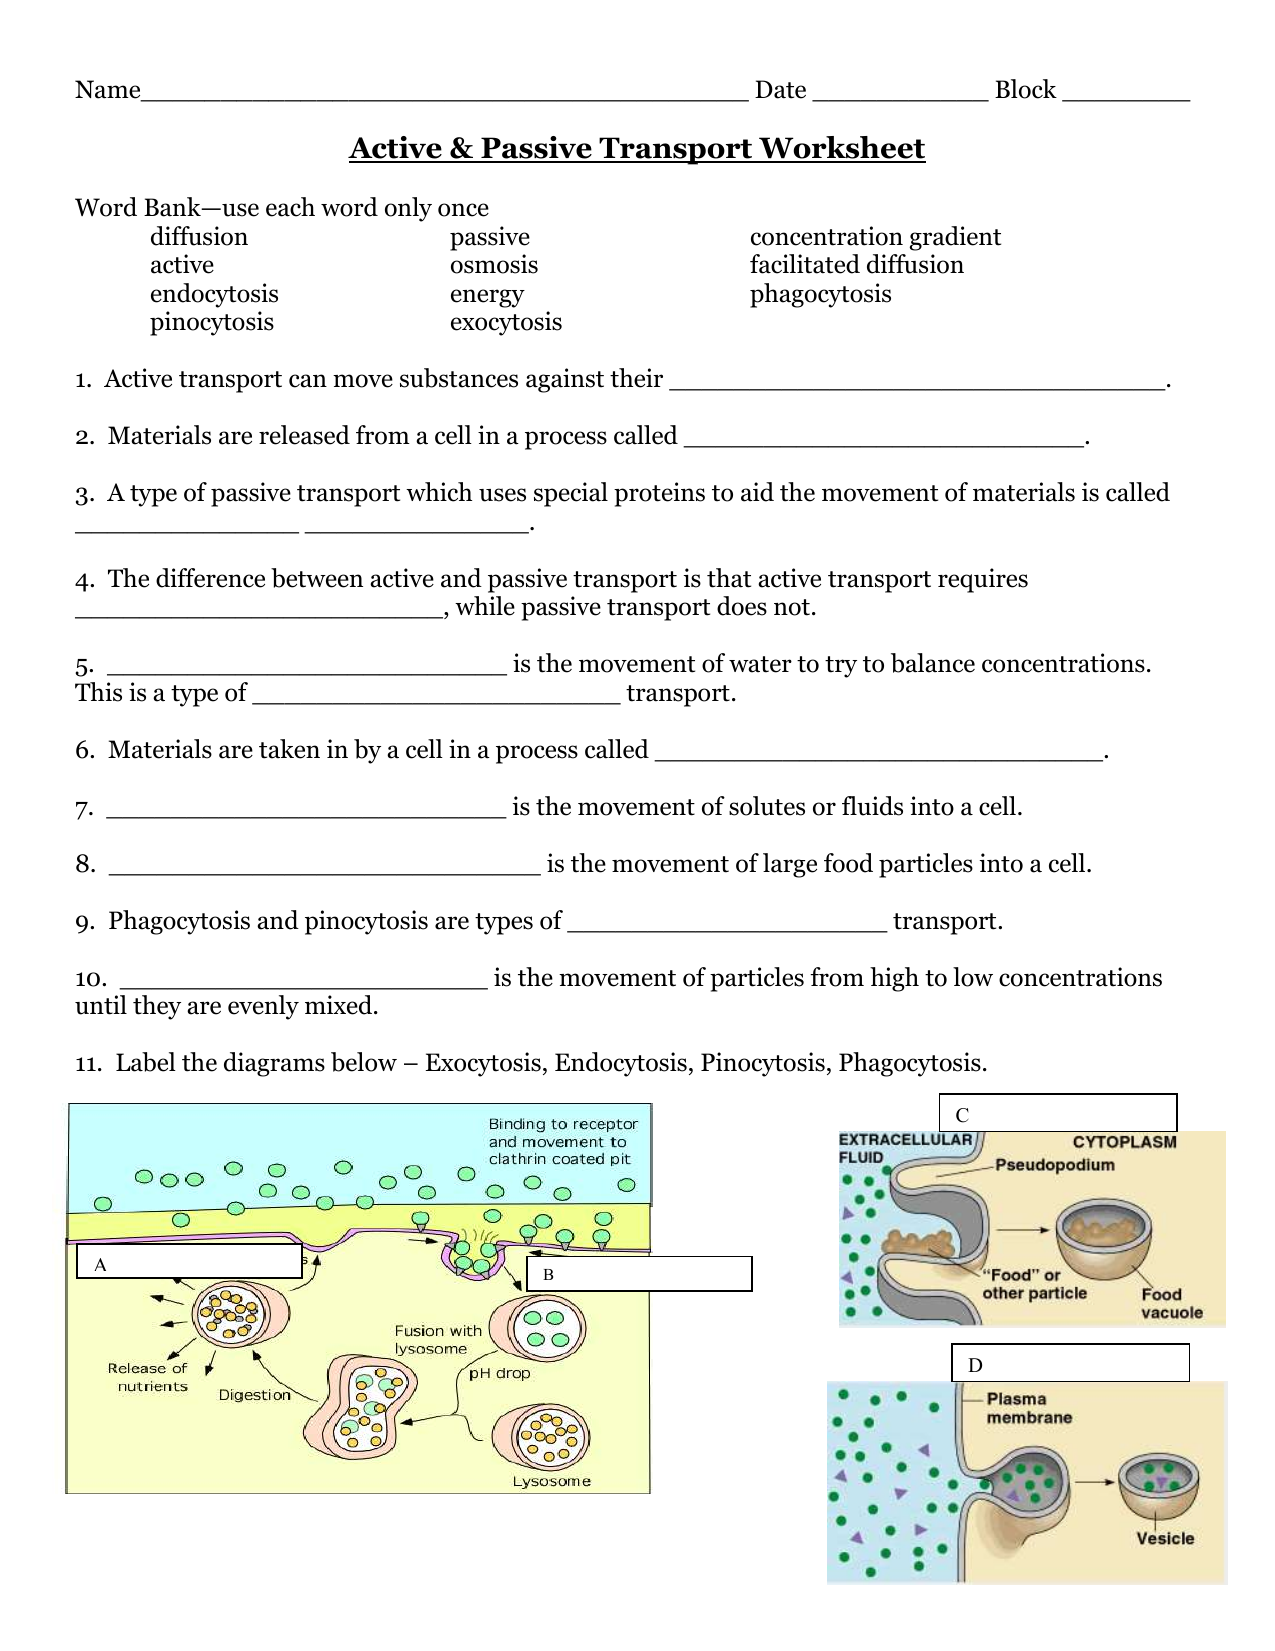 Passive and Active Transport Name In Passive And Active Transport Worksheet